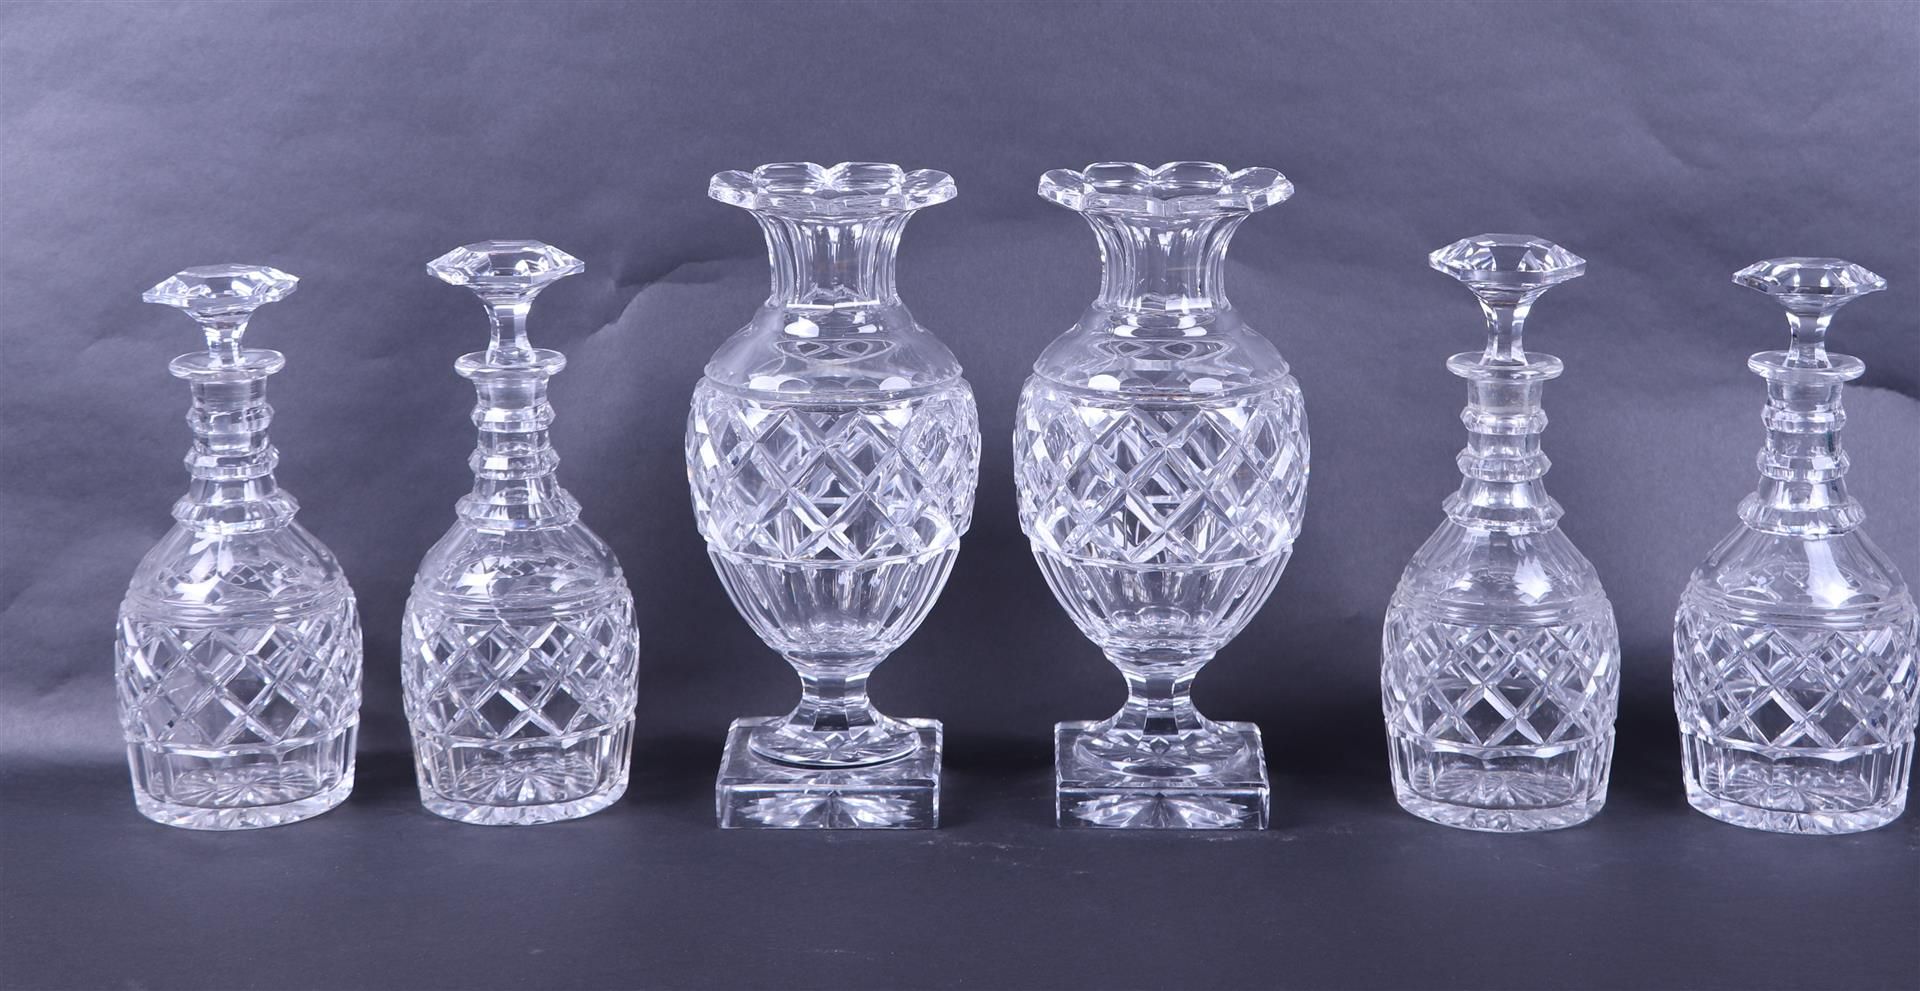 Lot of 4 Cut Crystal Decanters with Stoppers and a Pair of Baluster Vases